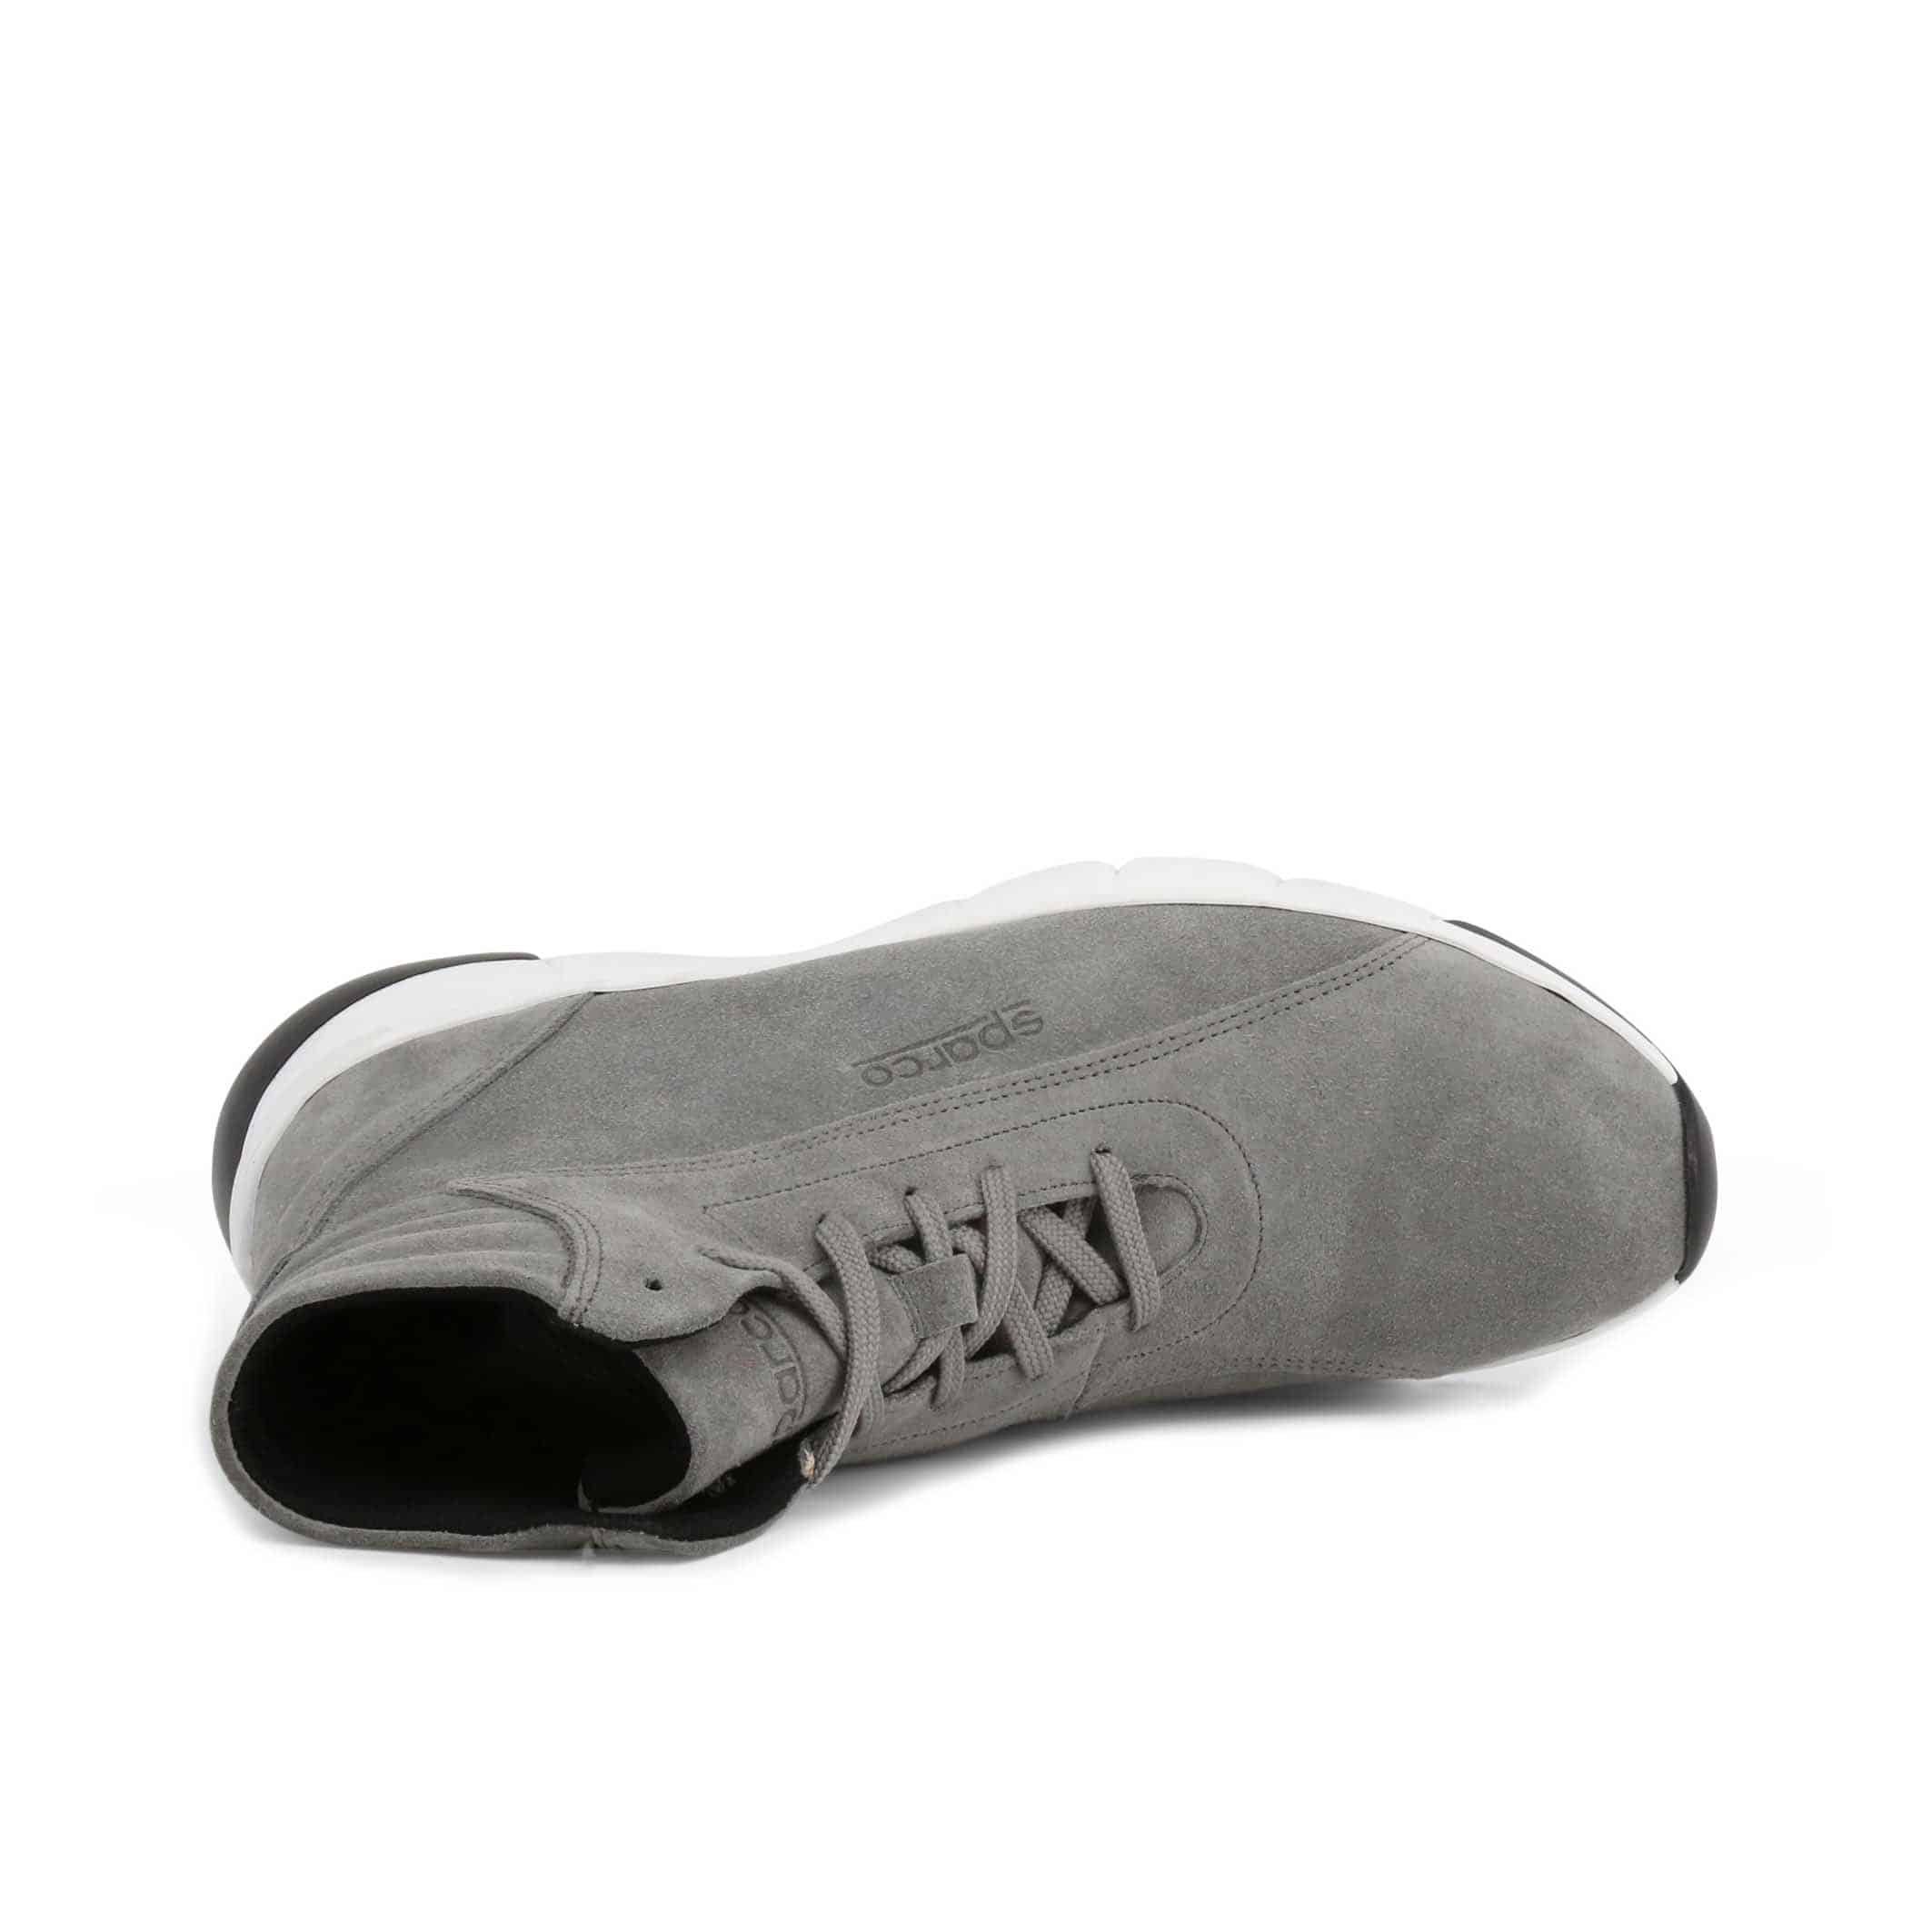 Sparco Monza-Lesmo Grey Shoes Sneakers in Suede » Sparco Fashion AU|NZ